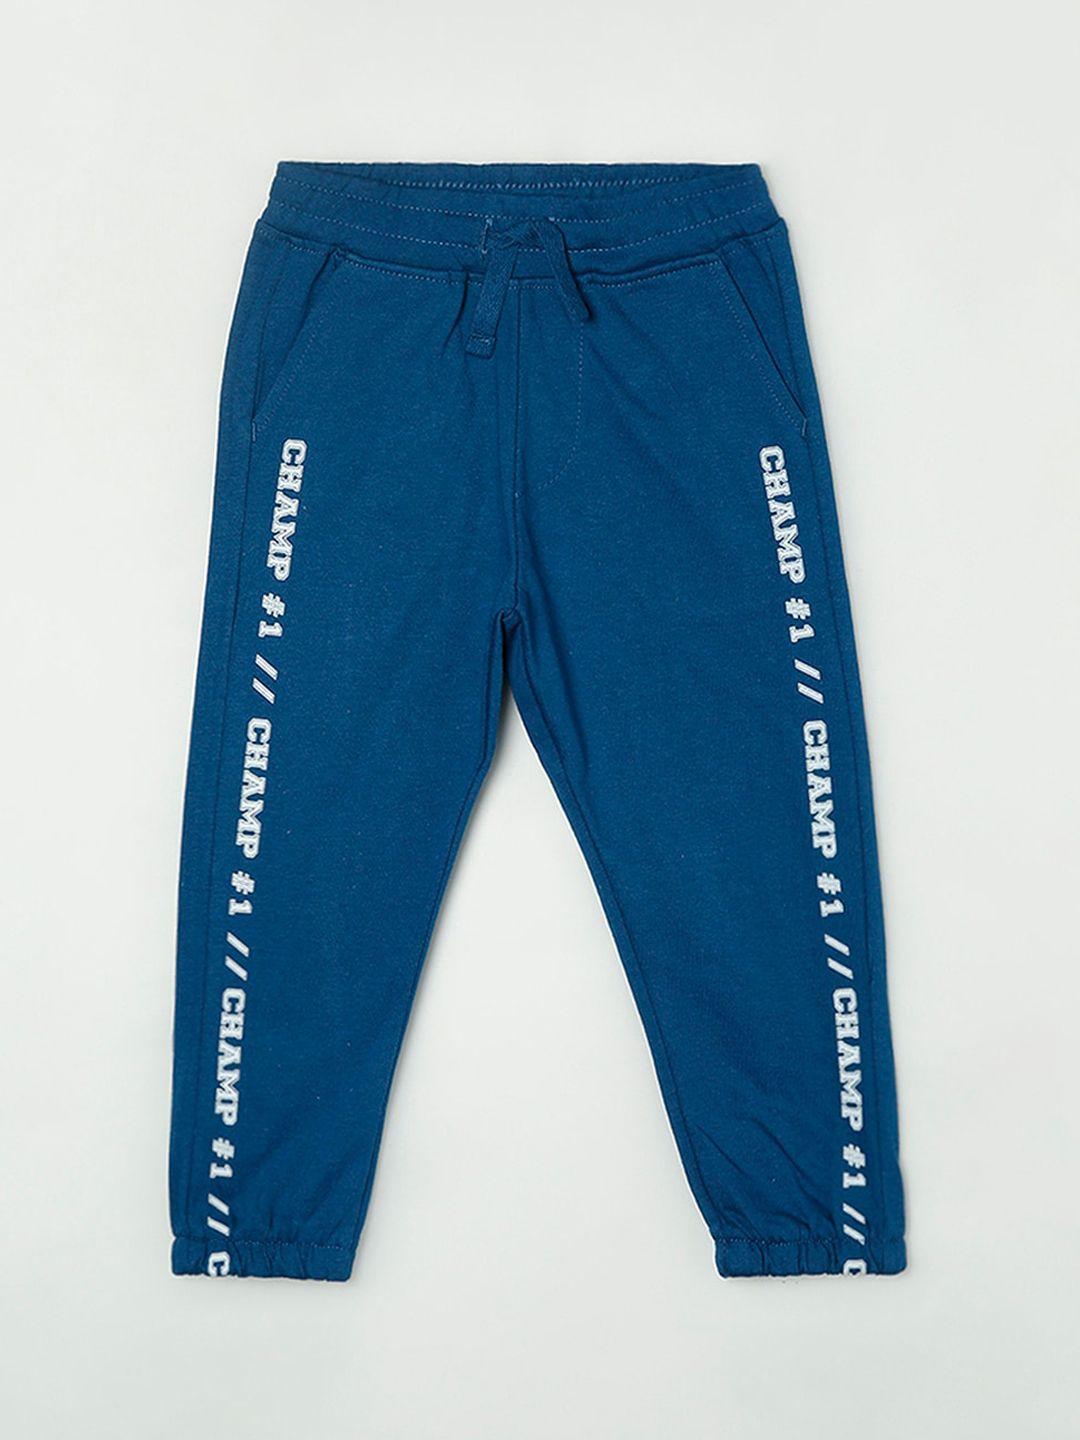 Juniors by Lifestyle Boys Blue Printed Cotton Joggers